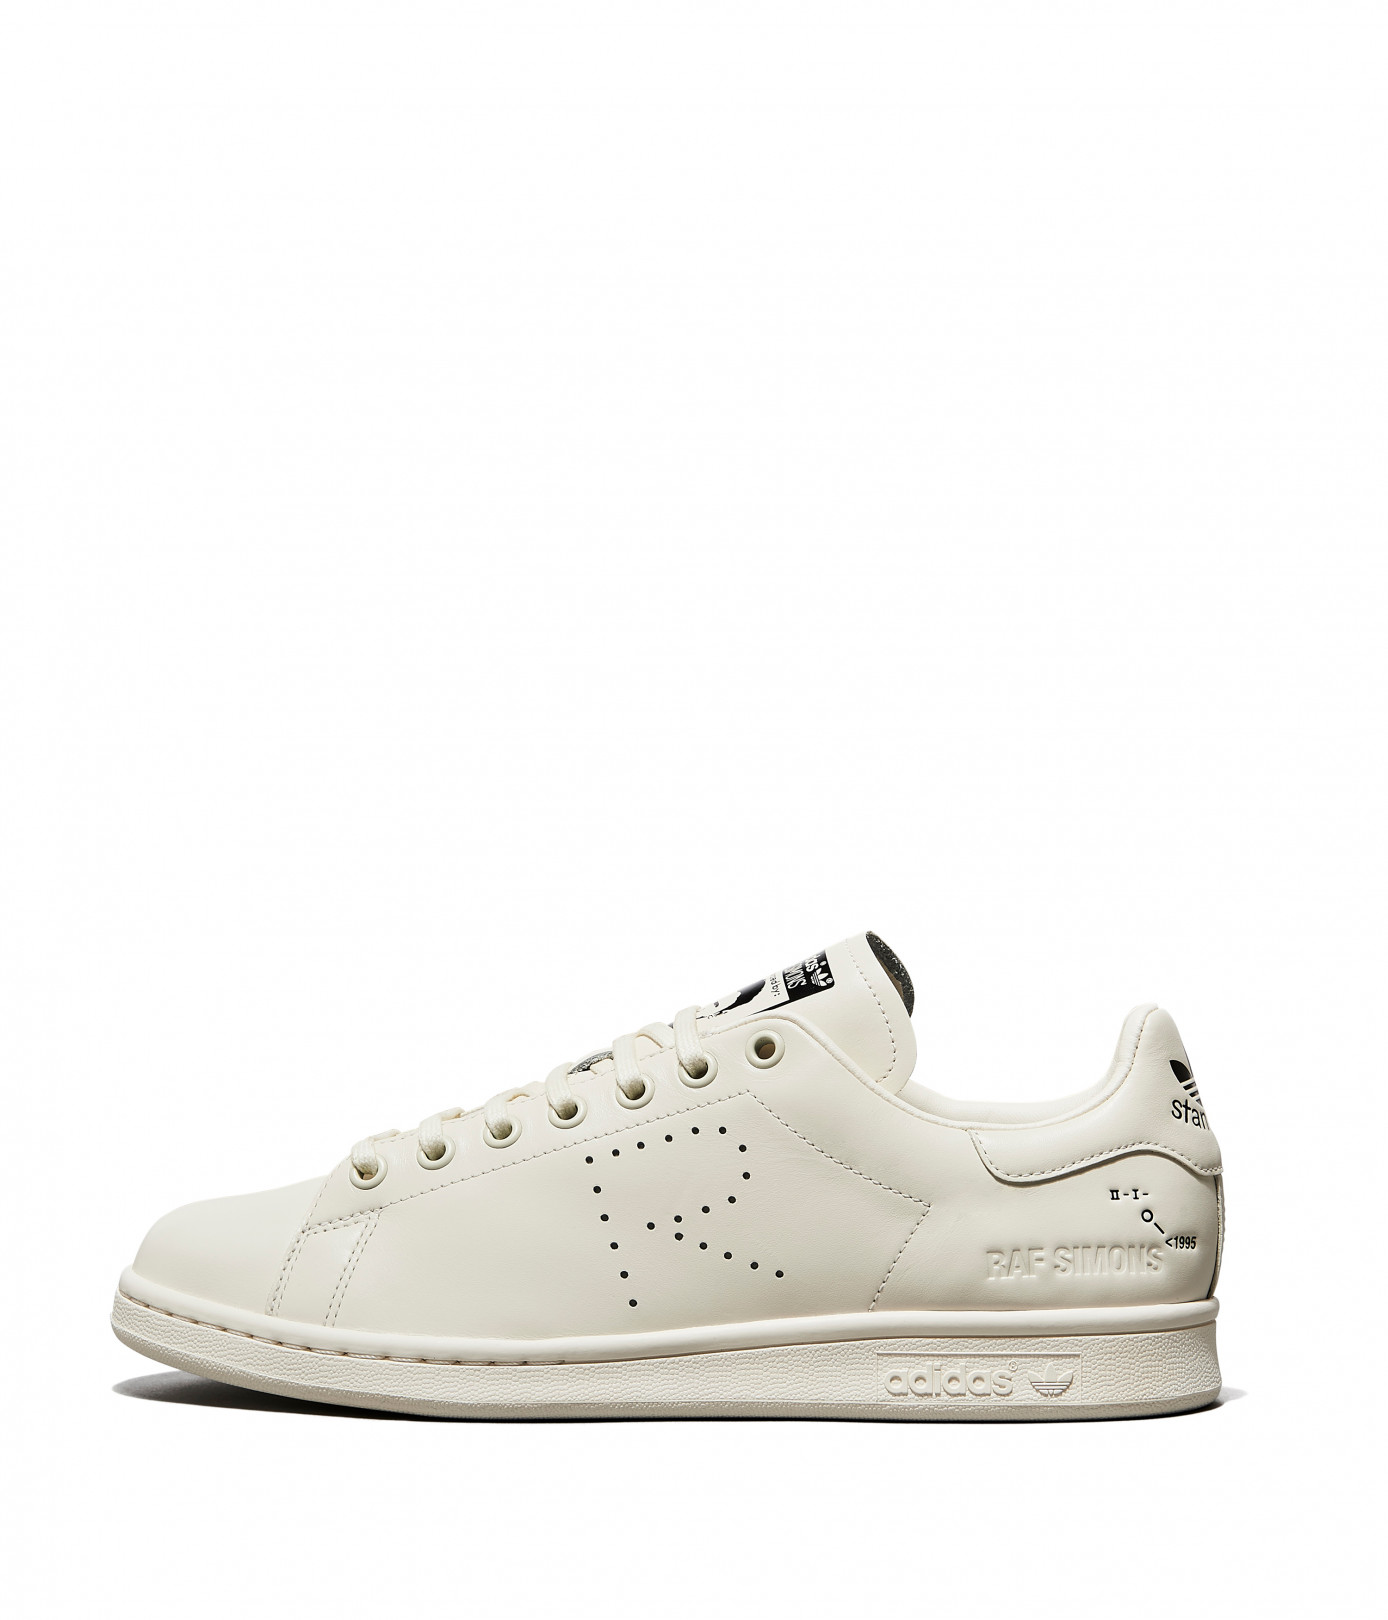 「RS スタンスミス（RS STAN SMITH）」（3万8,000円）